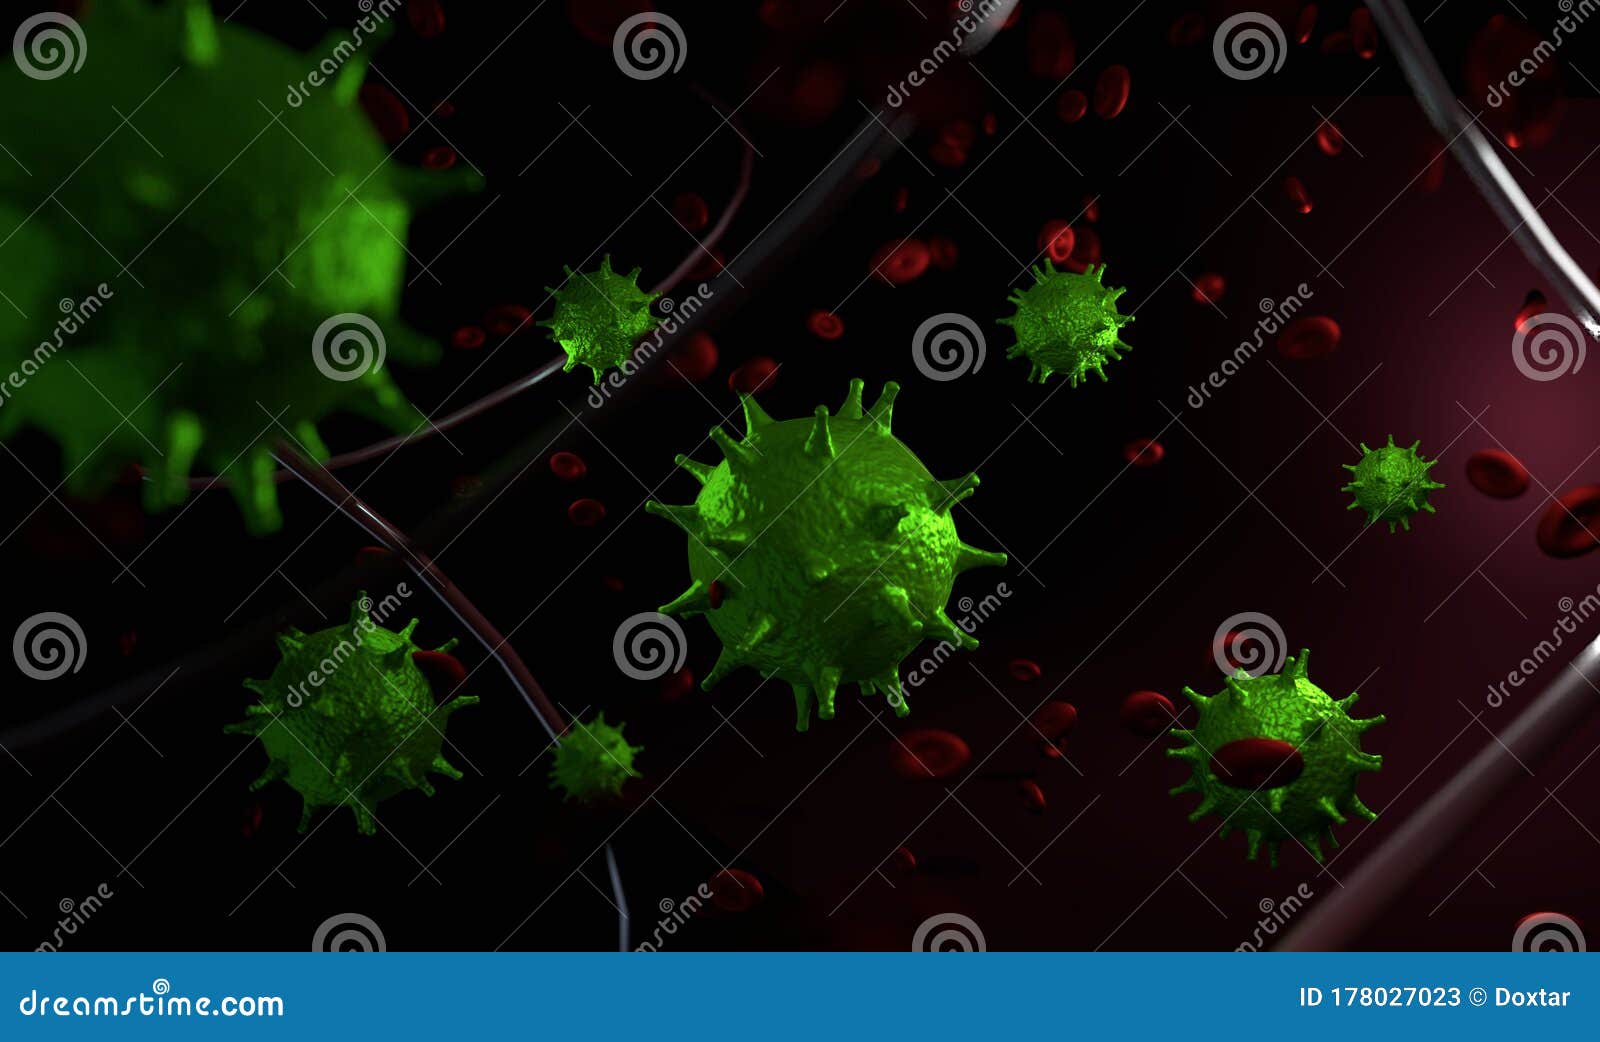 green virus molecula and red blood cells 3d render